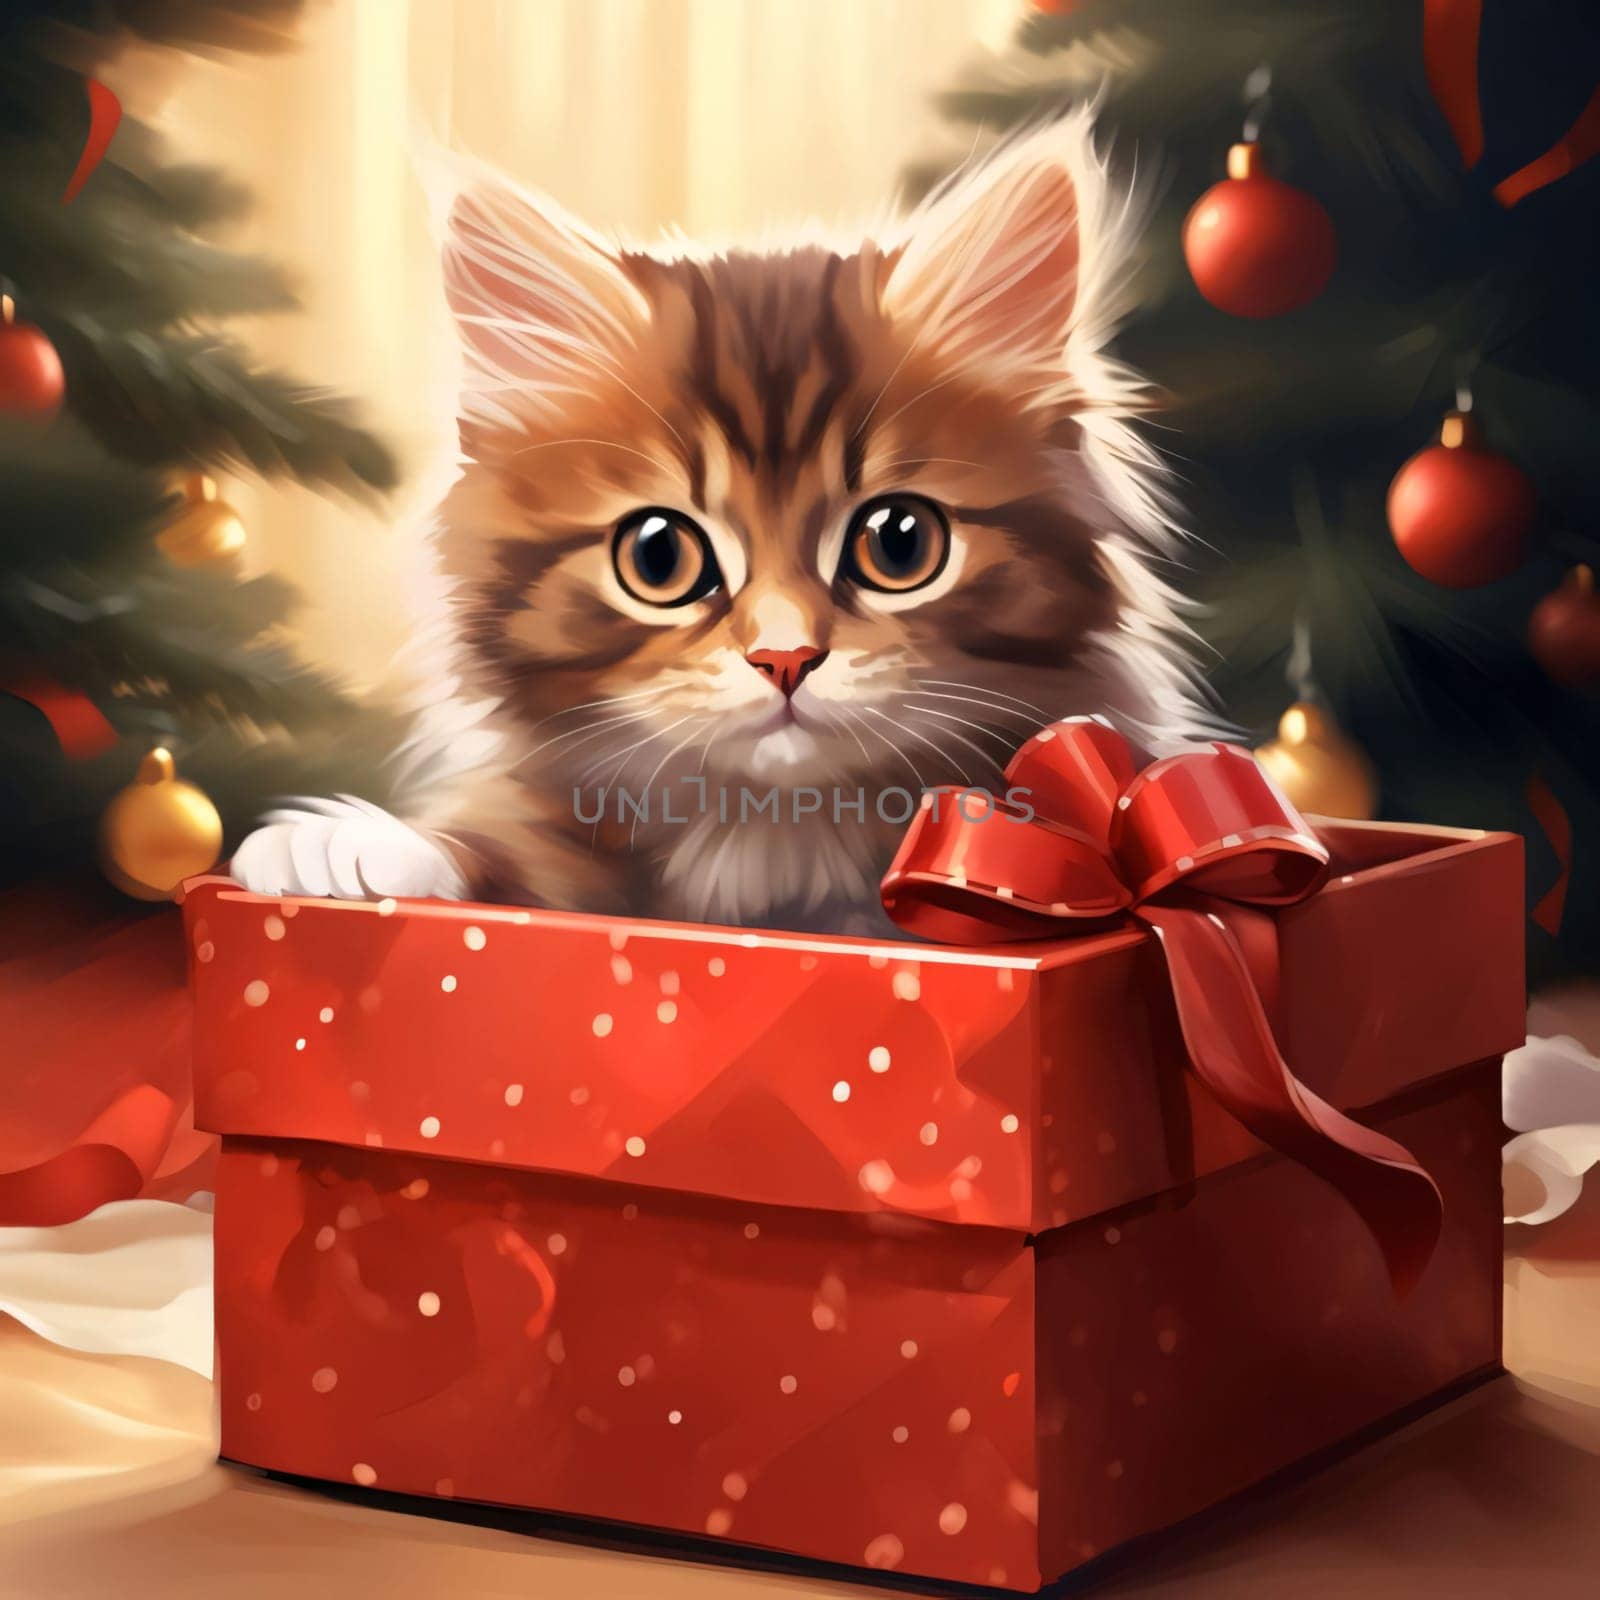 A tiny cat in a red box, a gift with bows. Gifts as a day symbol of present and love. A time of falling in love and love.